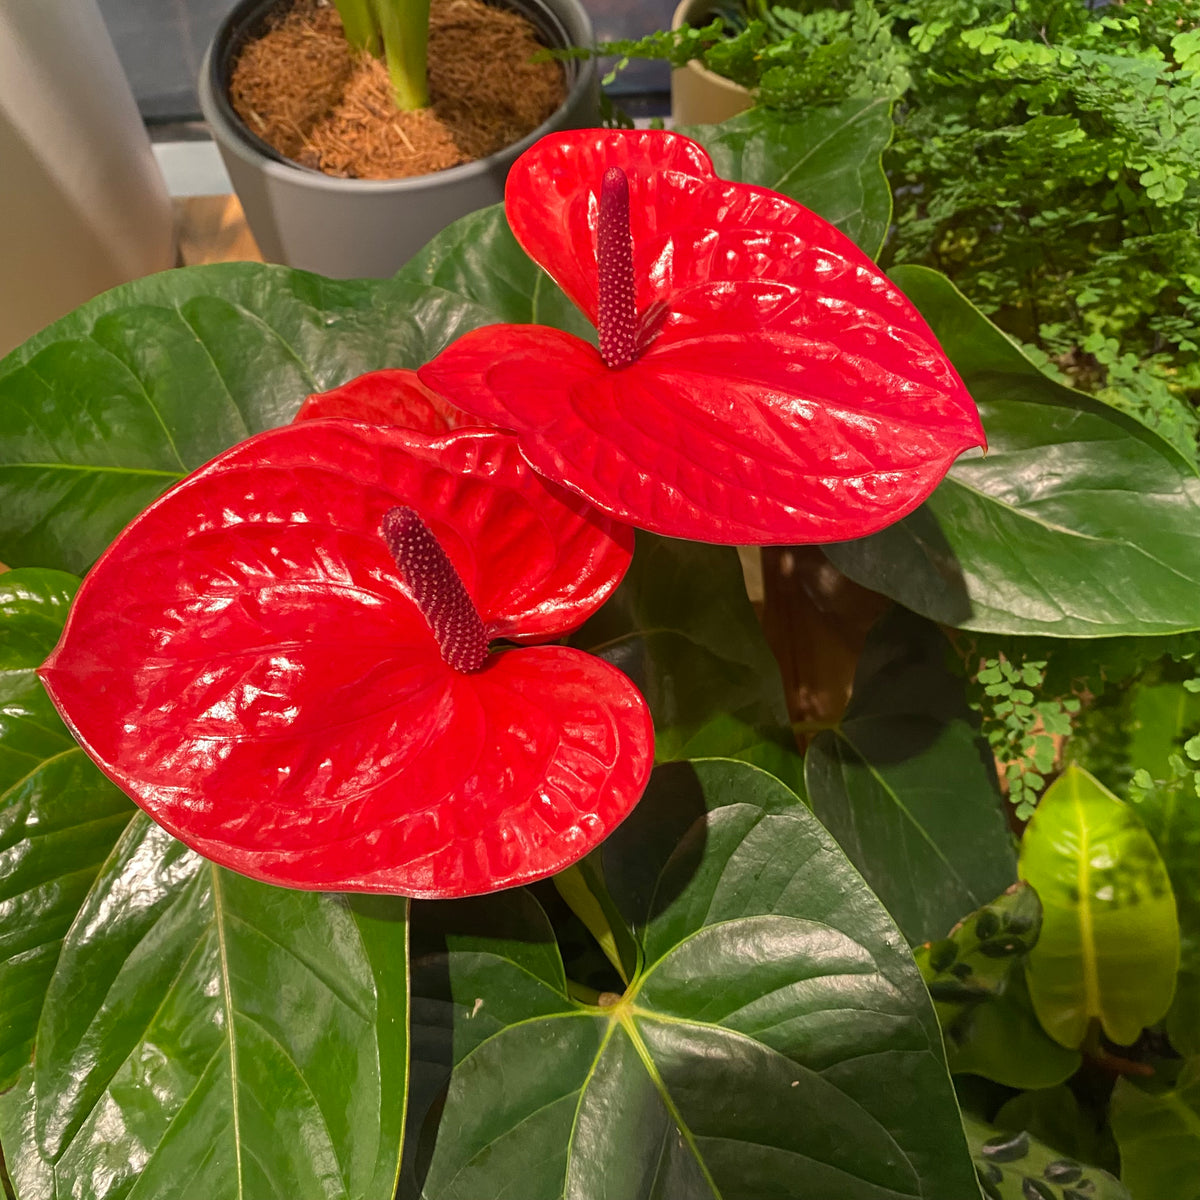 red peace lily plant